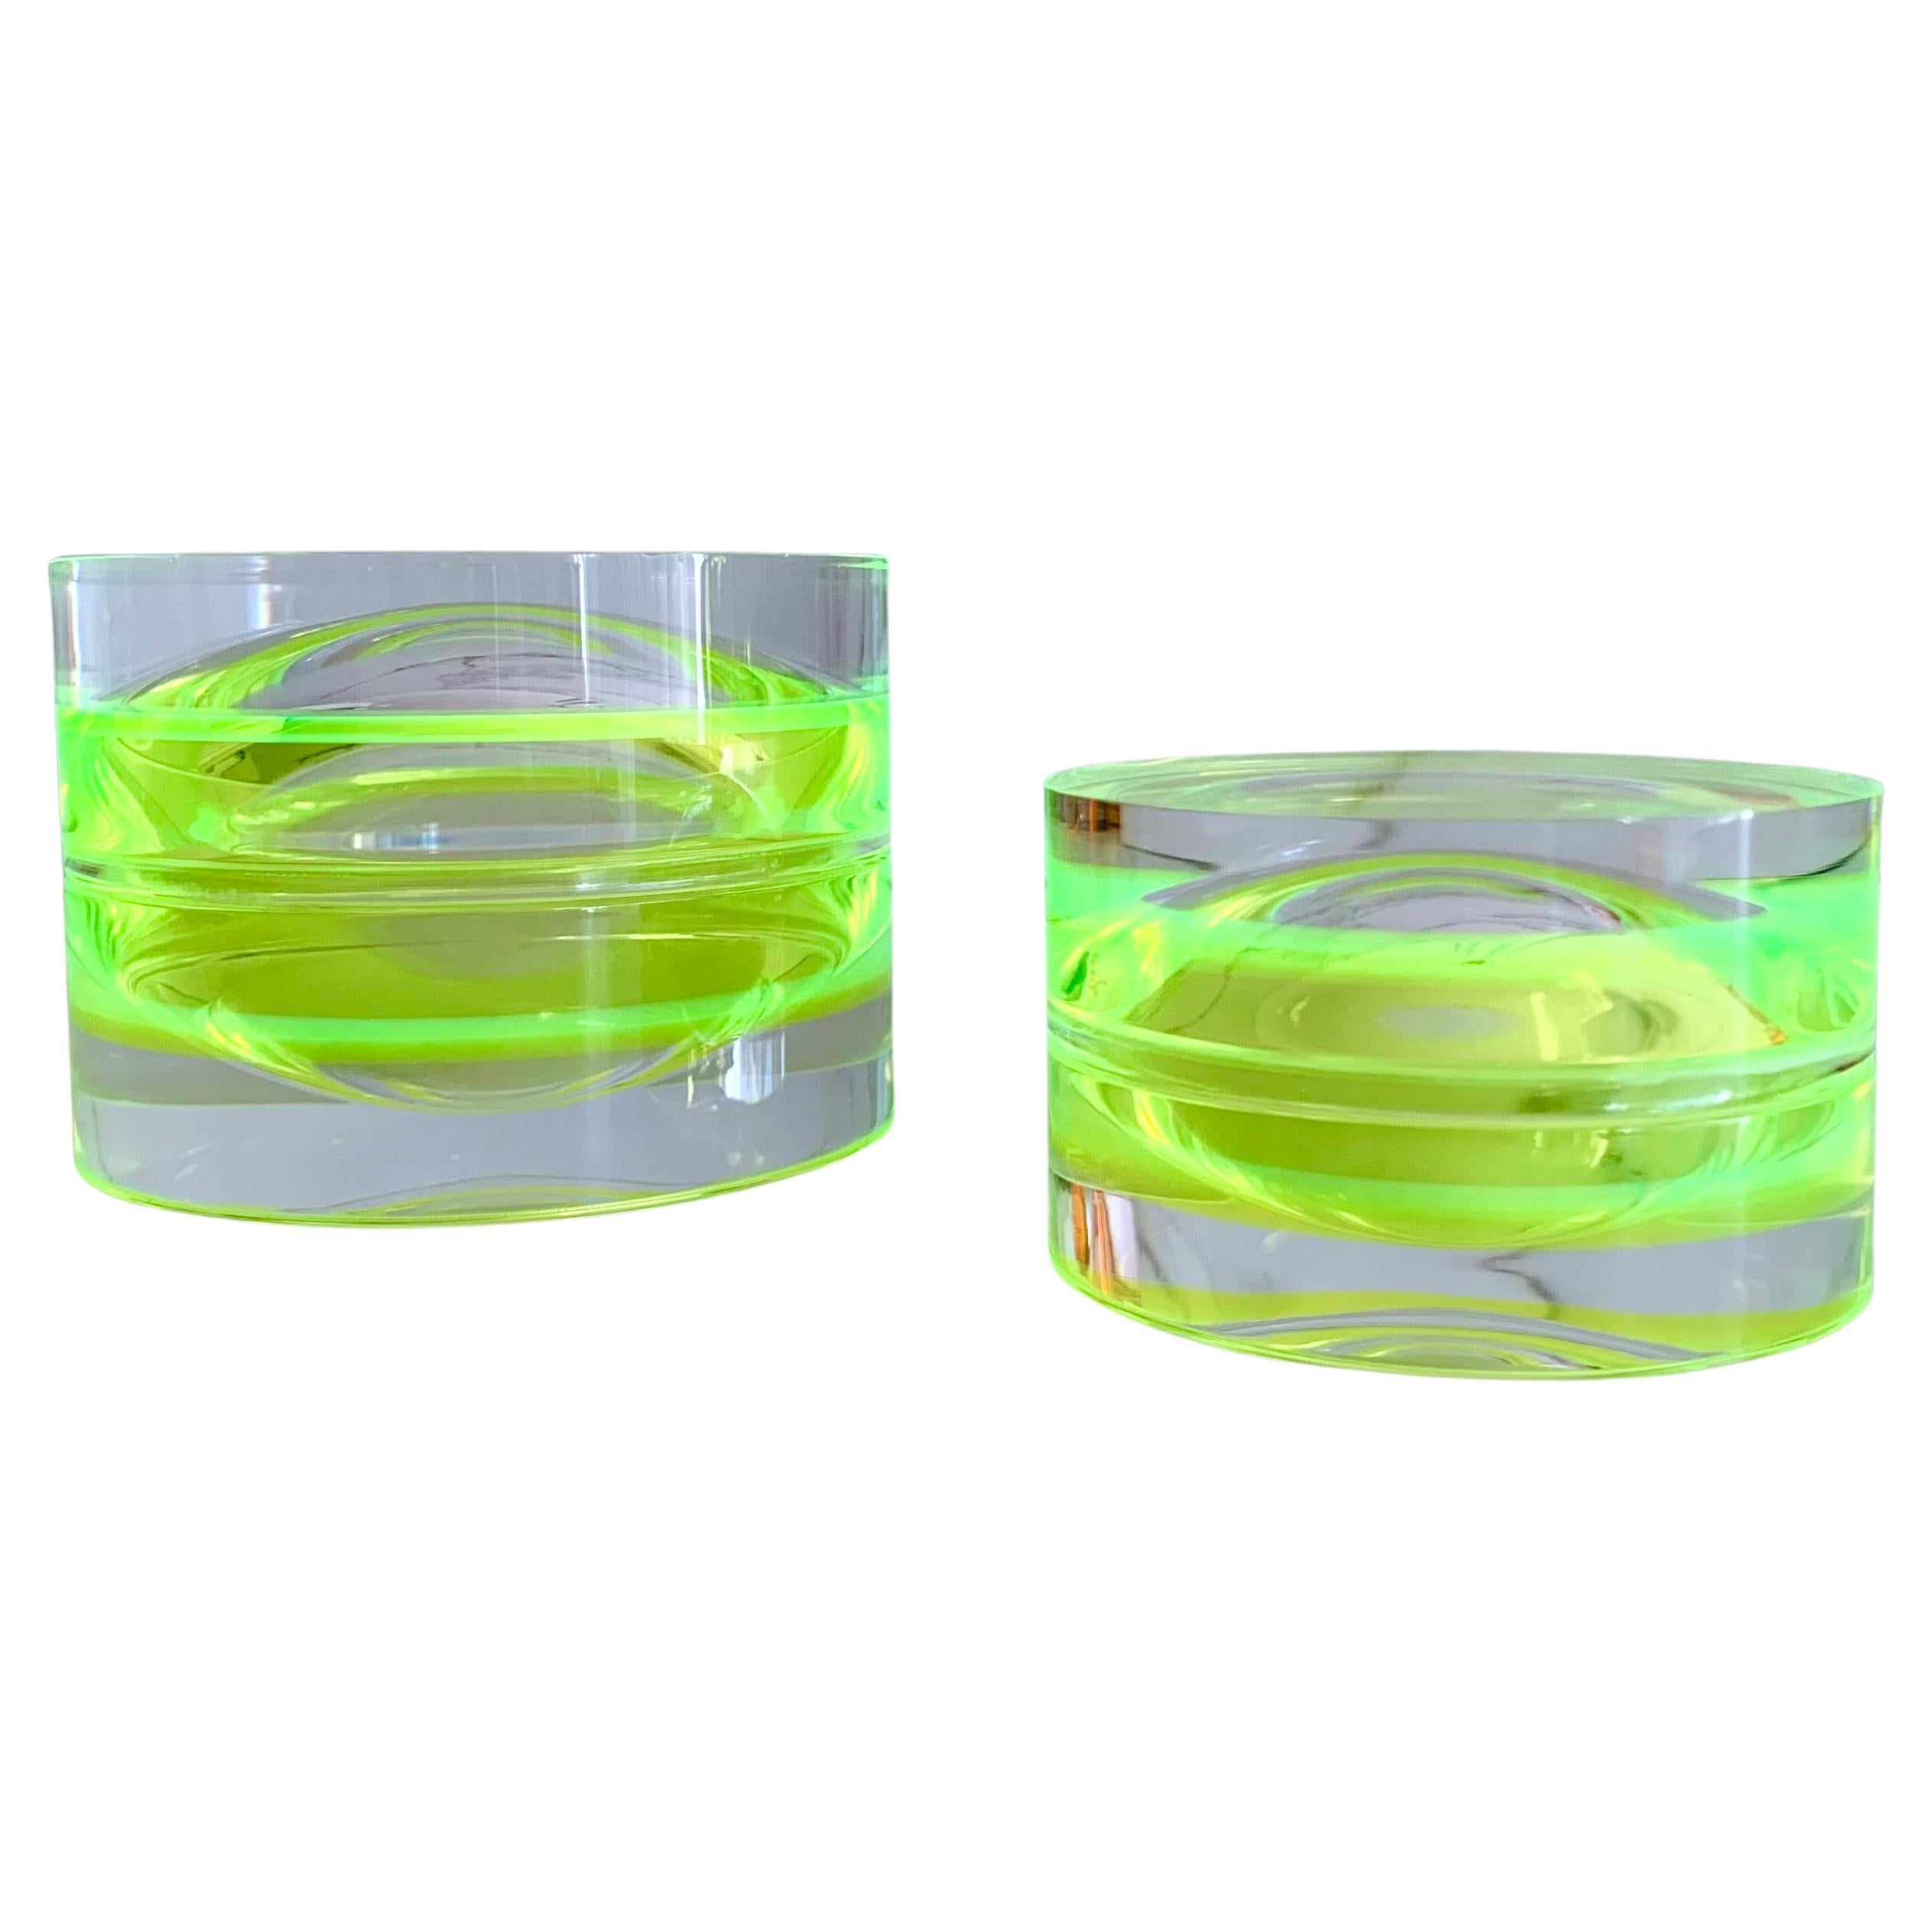 Neon Green Acrylic Large Round Box by Paola Valle For Sale